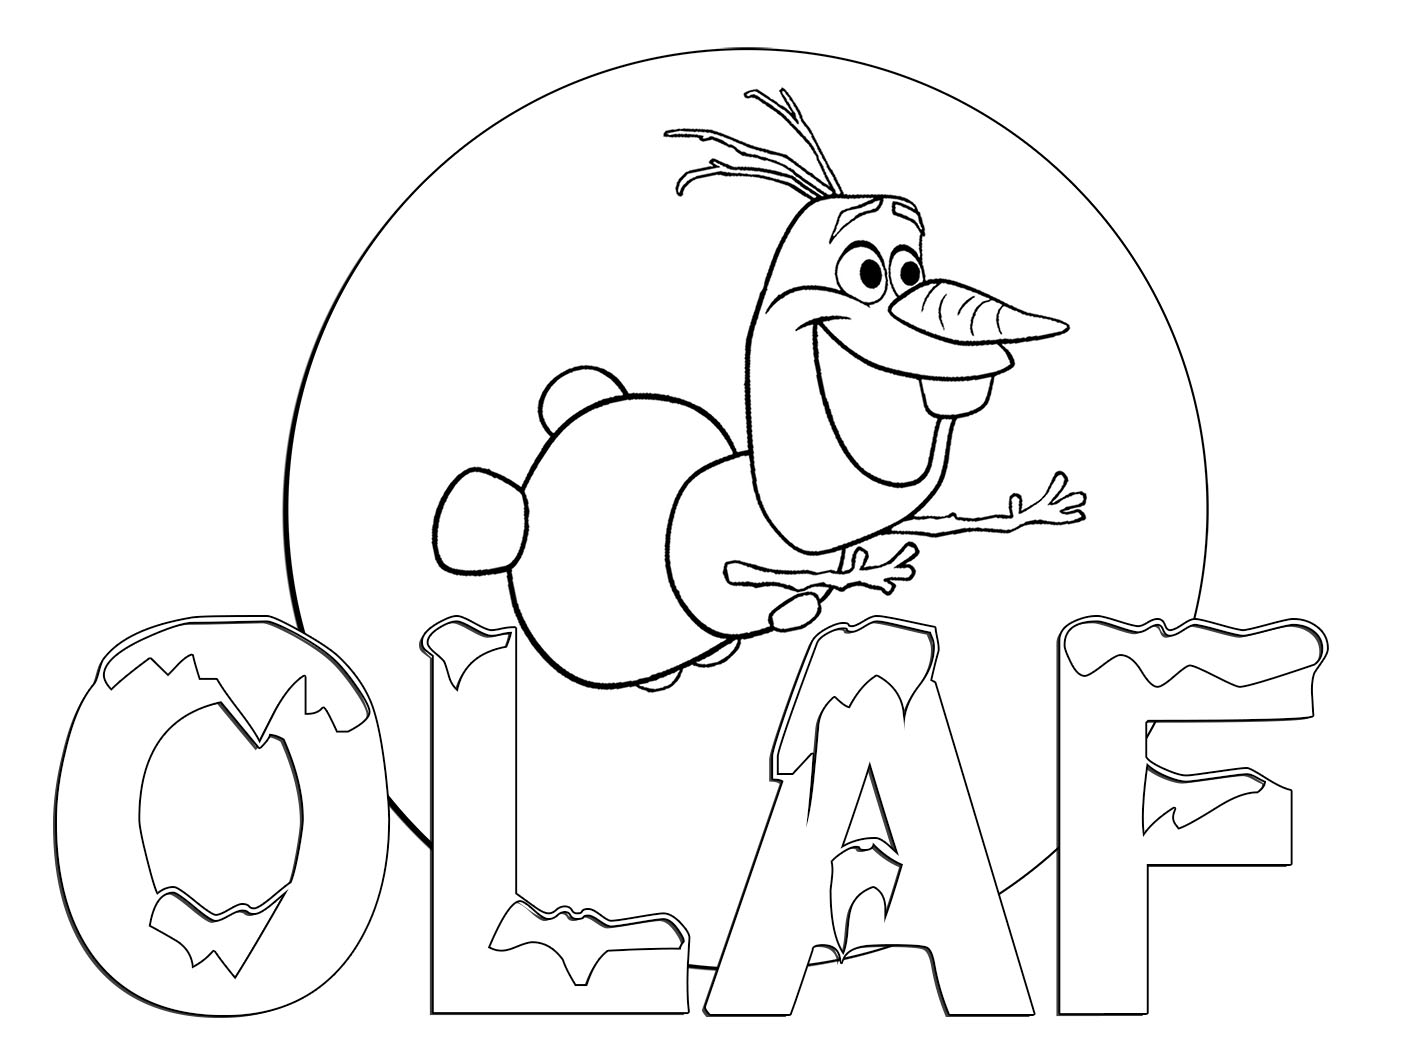  Frozen Coloring Pages | Color pages | FREE coloring pages for kids |Printable coloring pages for kids| #34